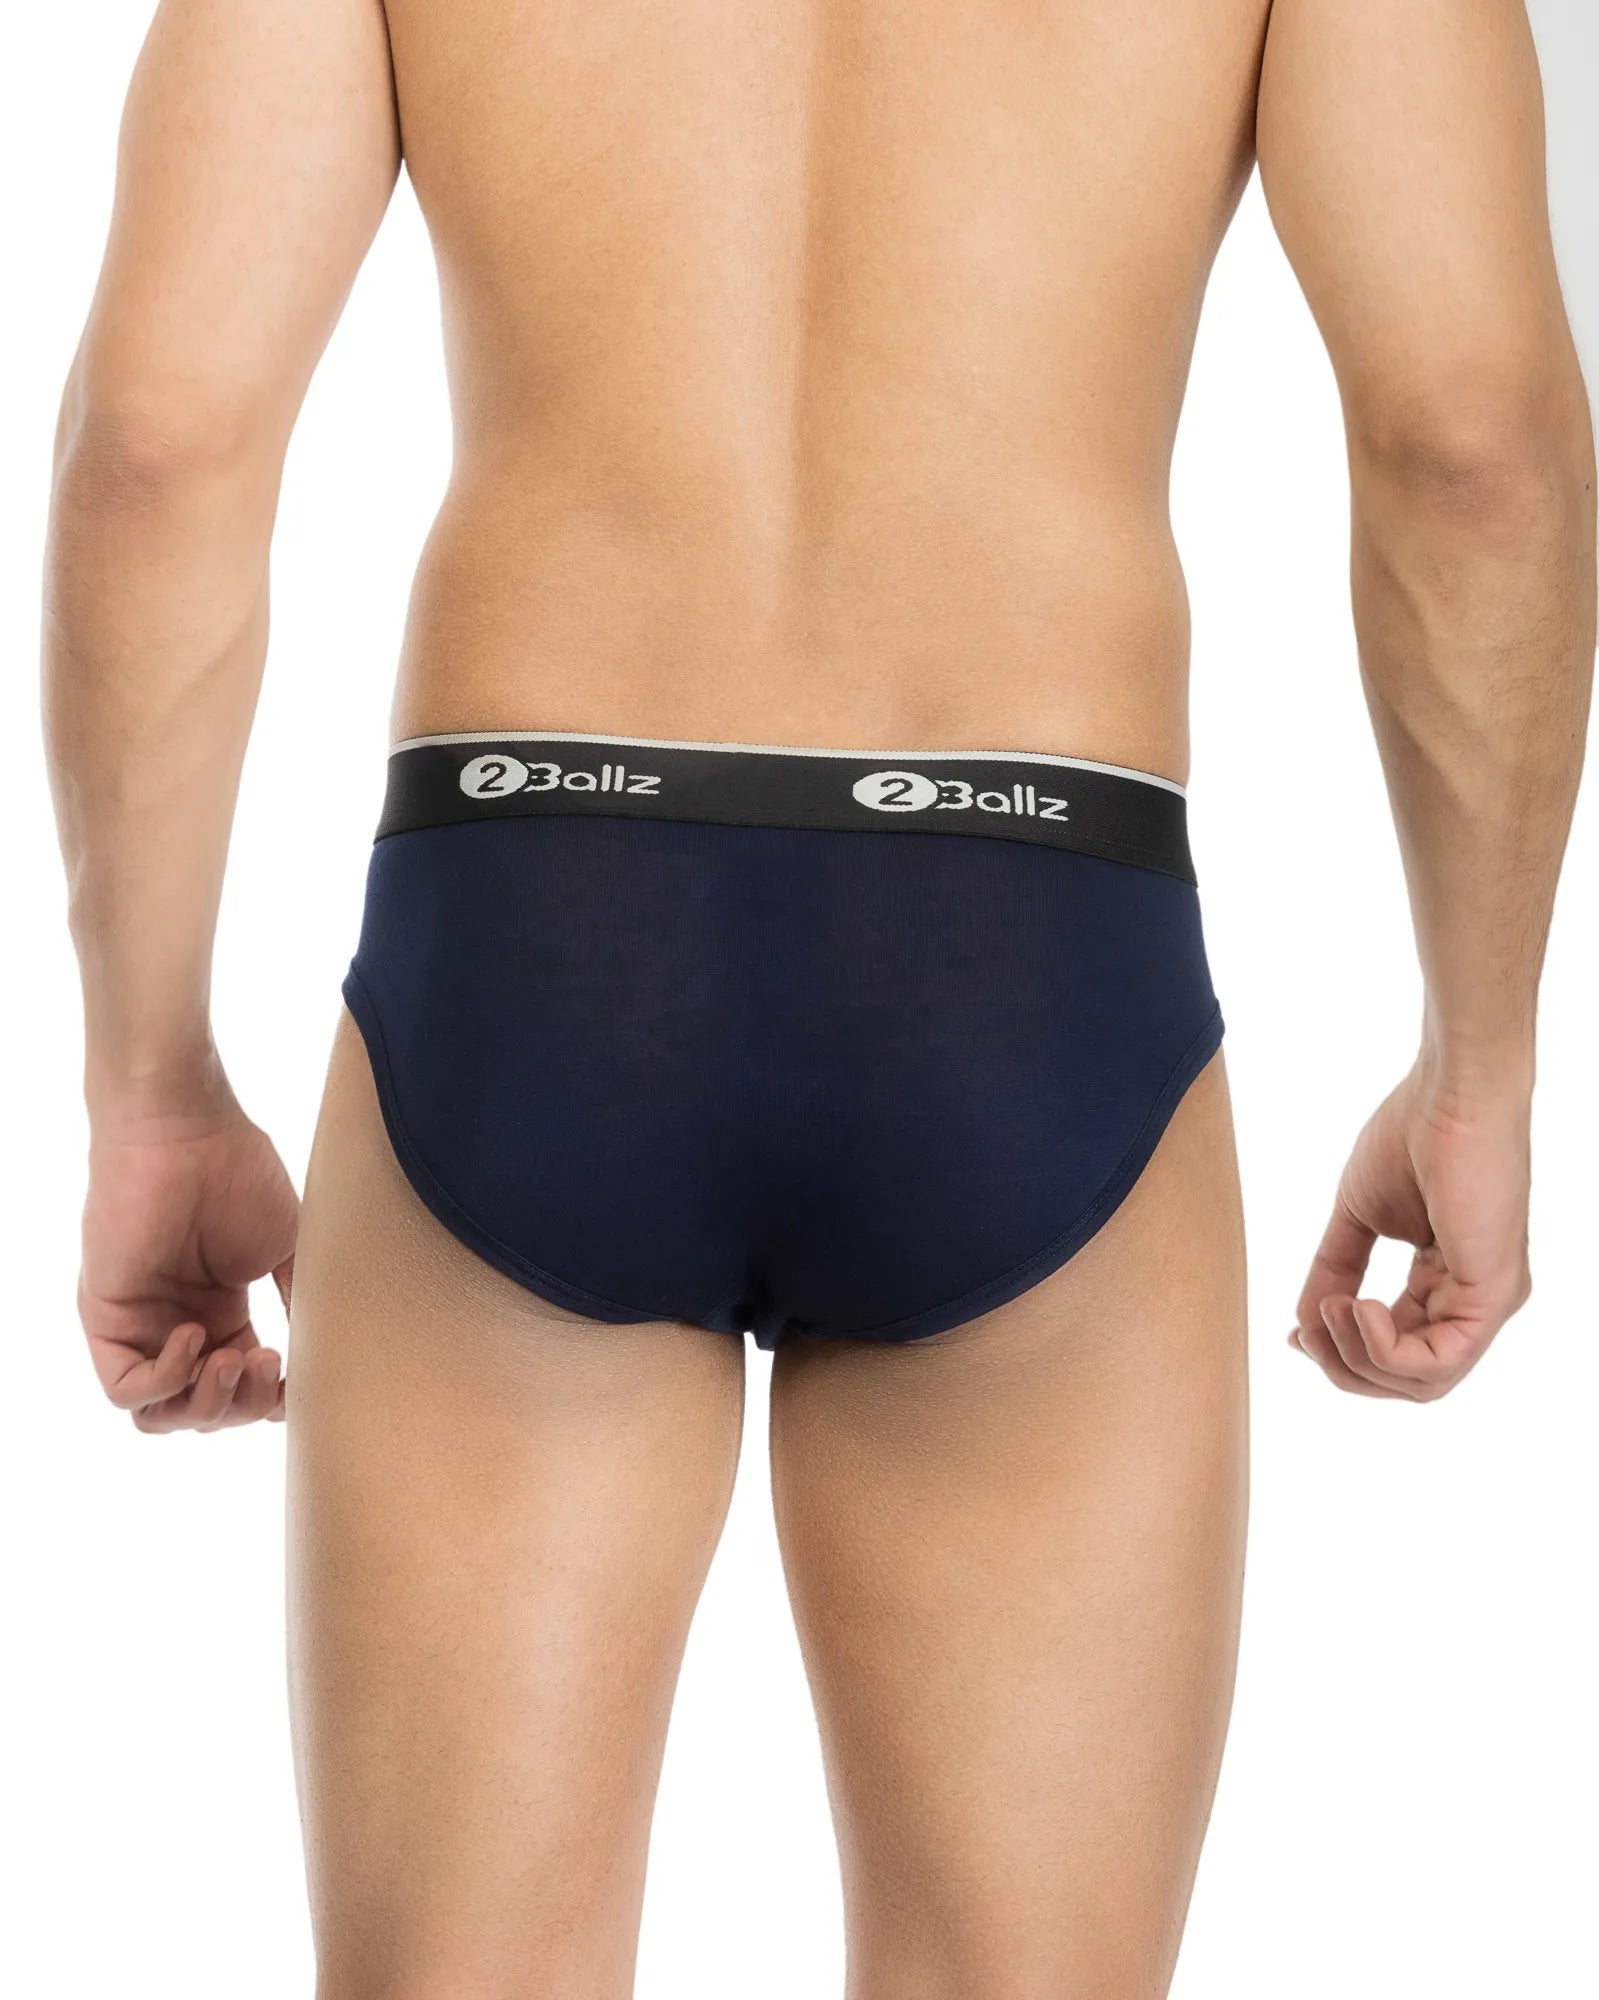 2Ballz Brief with Built-in Pouch (Pack of 3) - 2Ballz Clothing